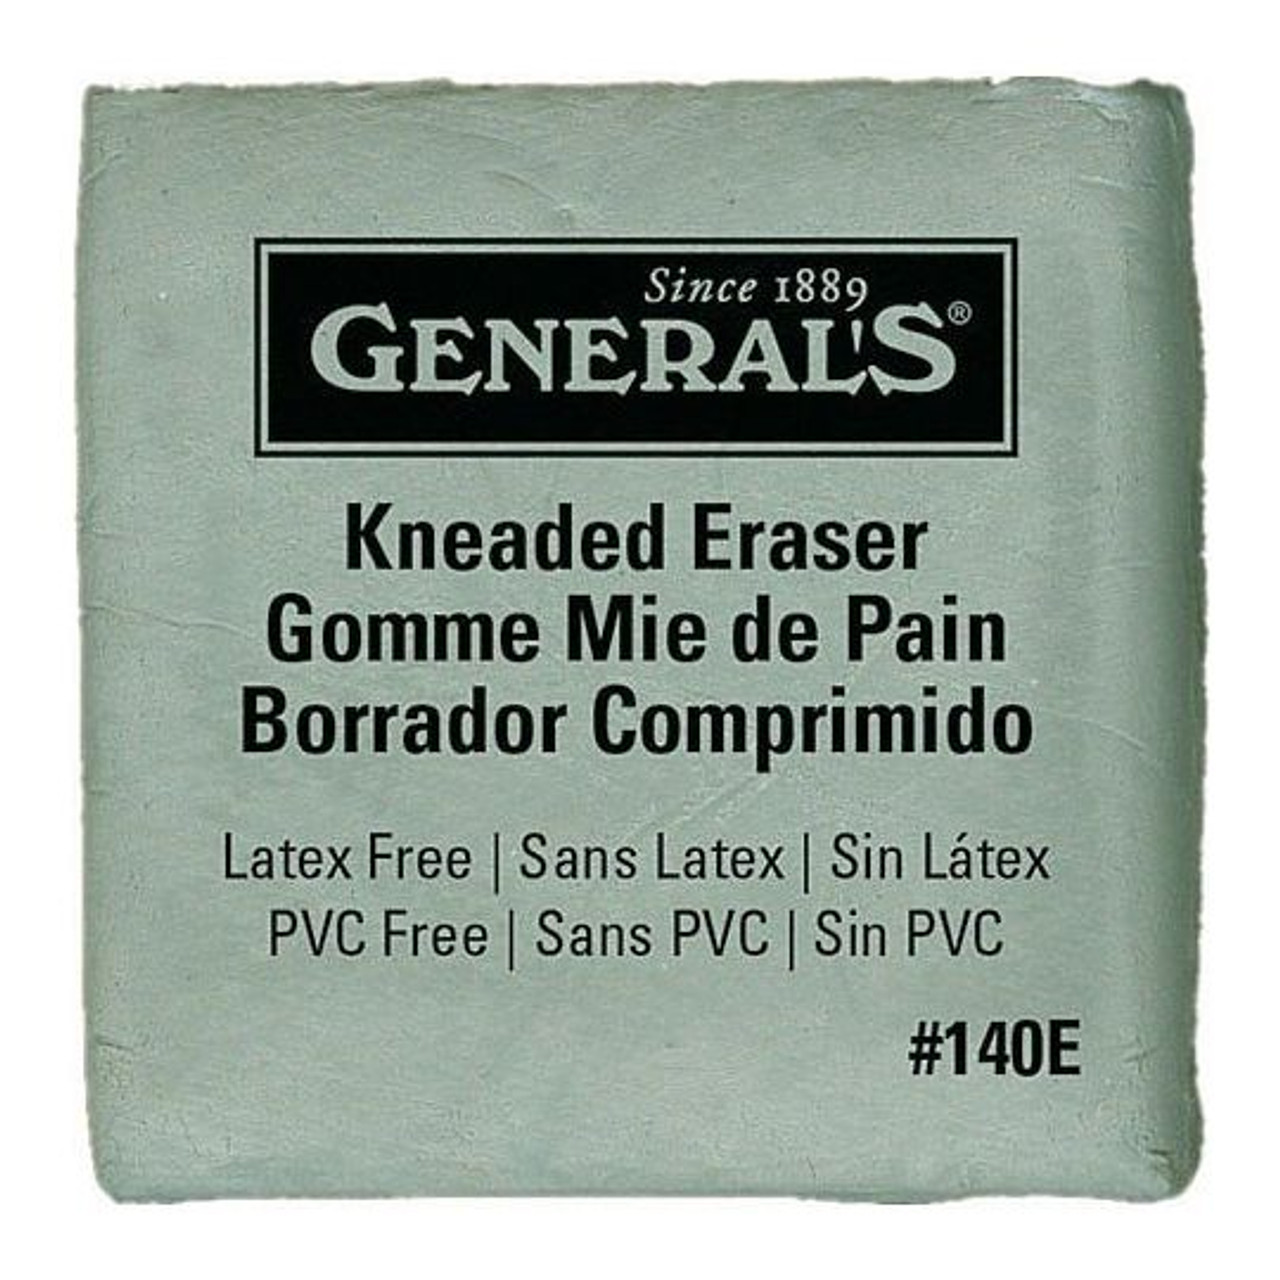 Kneaded Eraser 1-3/4 in. x 1-1/4 in. - Charcoal Expressions